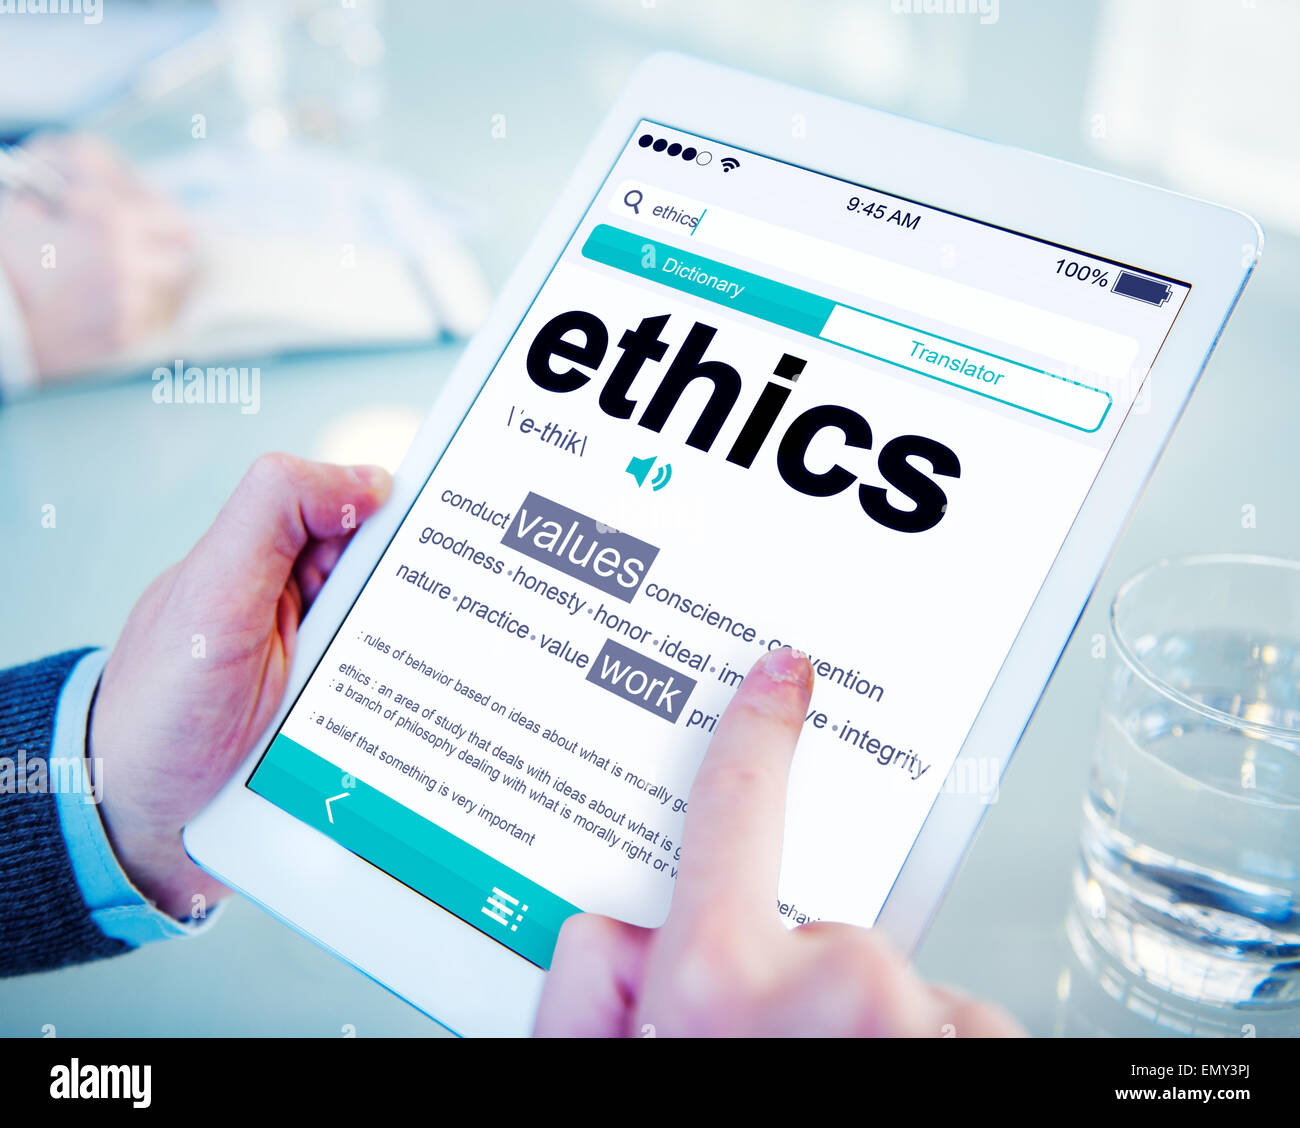 Man Reading the Definition of Ethics Stock Photo